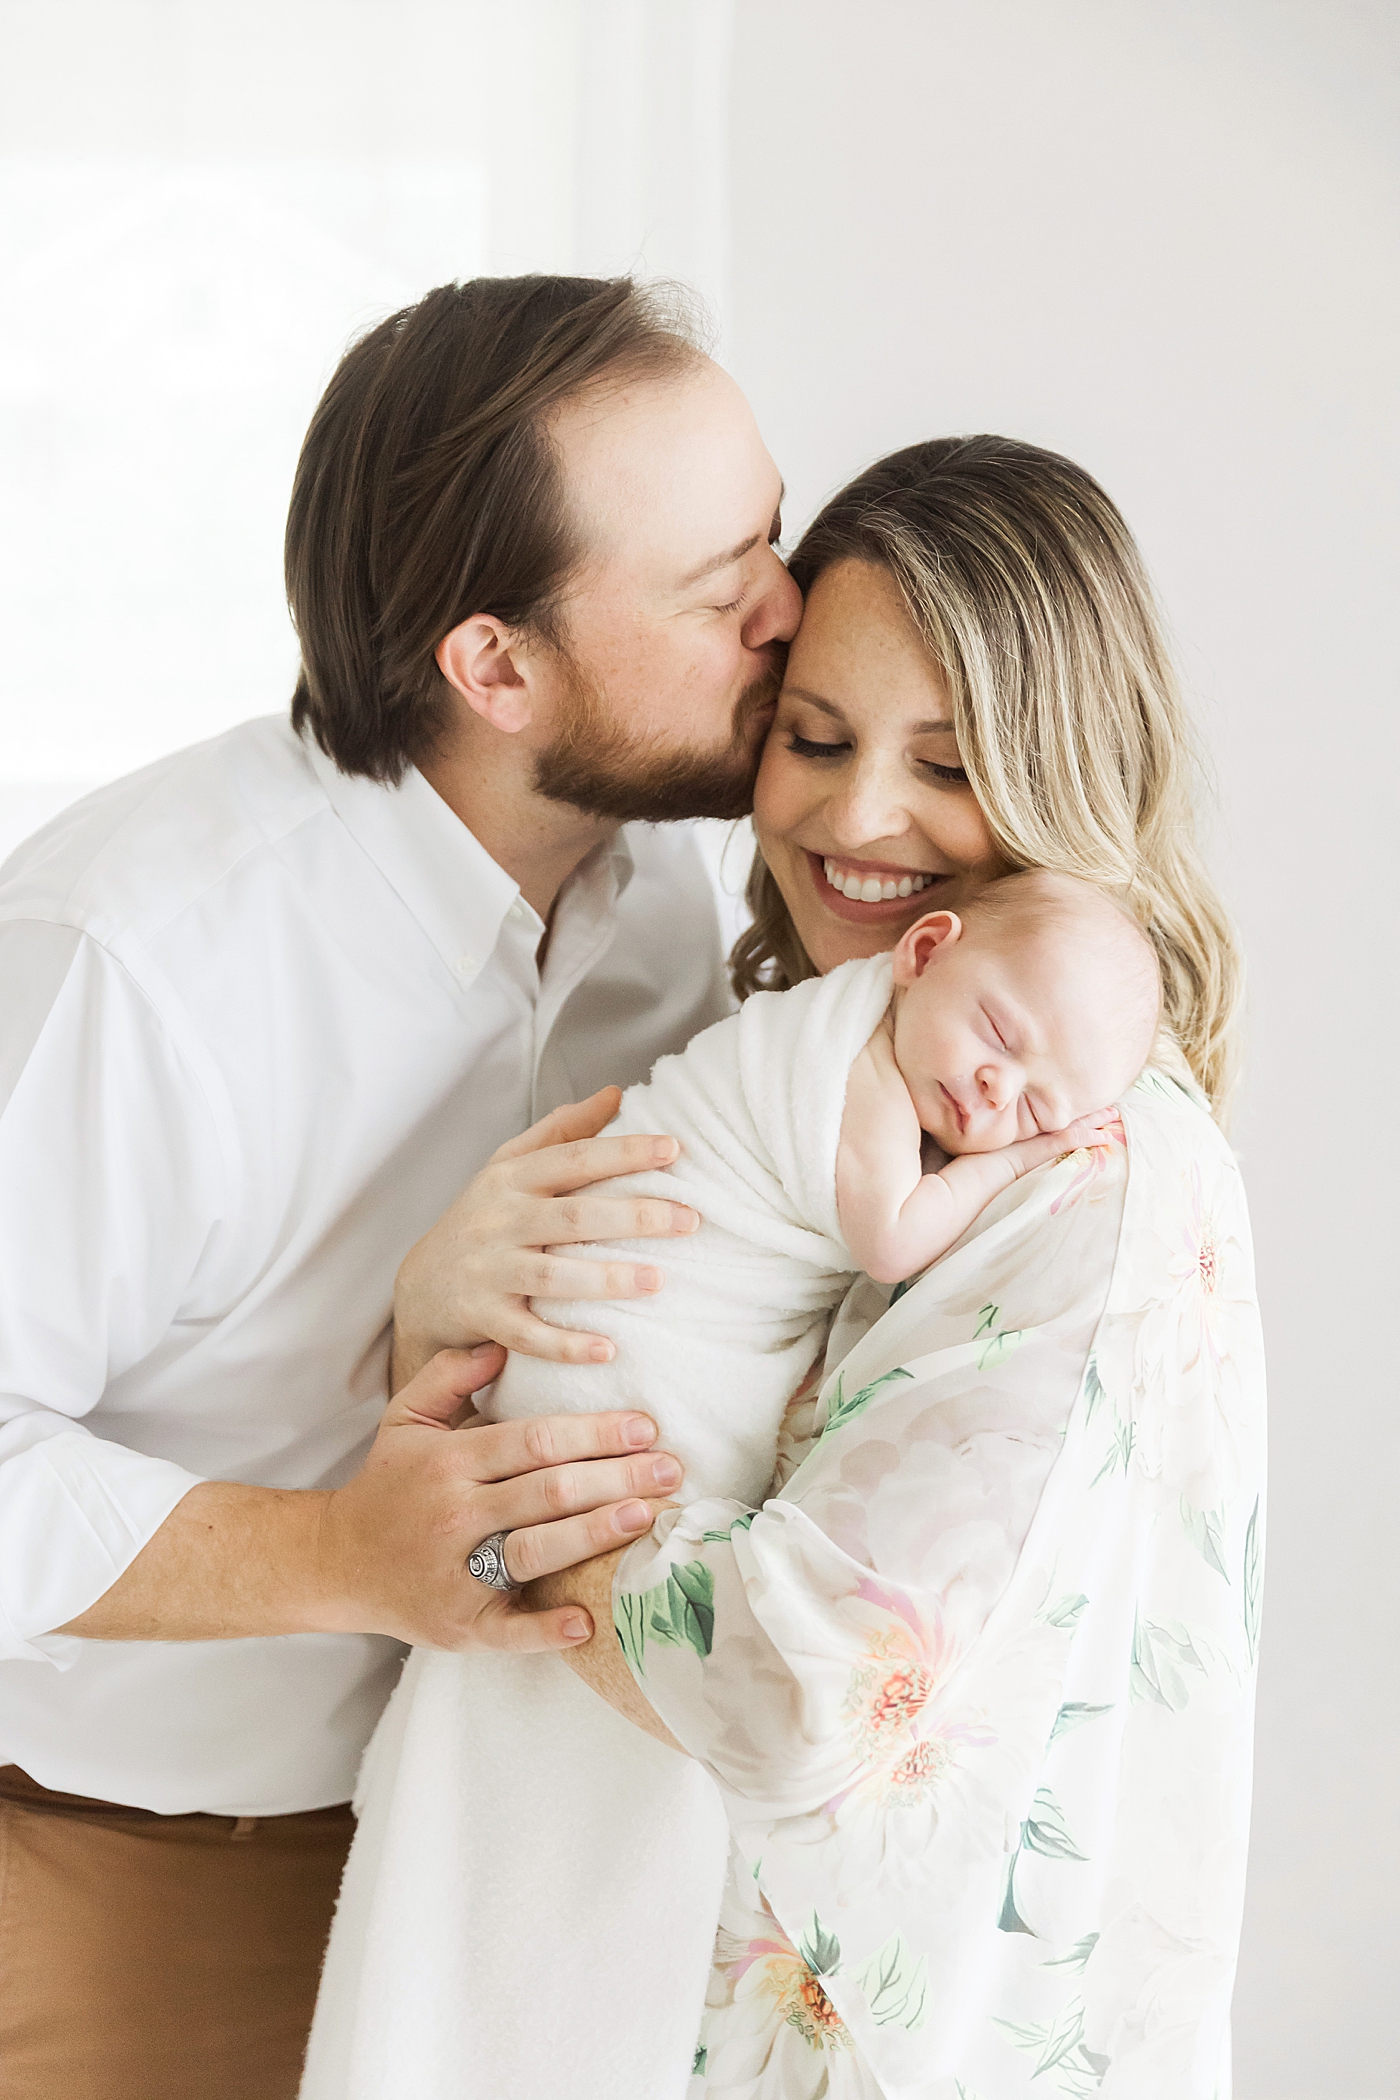 Dad kissing Mom while she holds their baby boy. Photo by Fresh Light Photography.